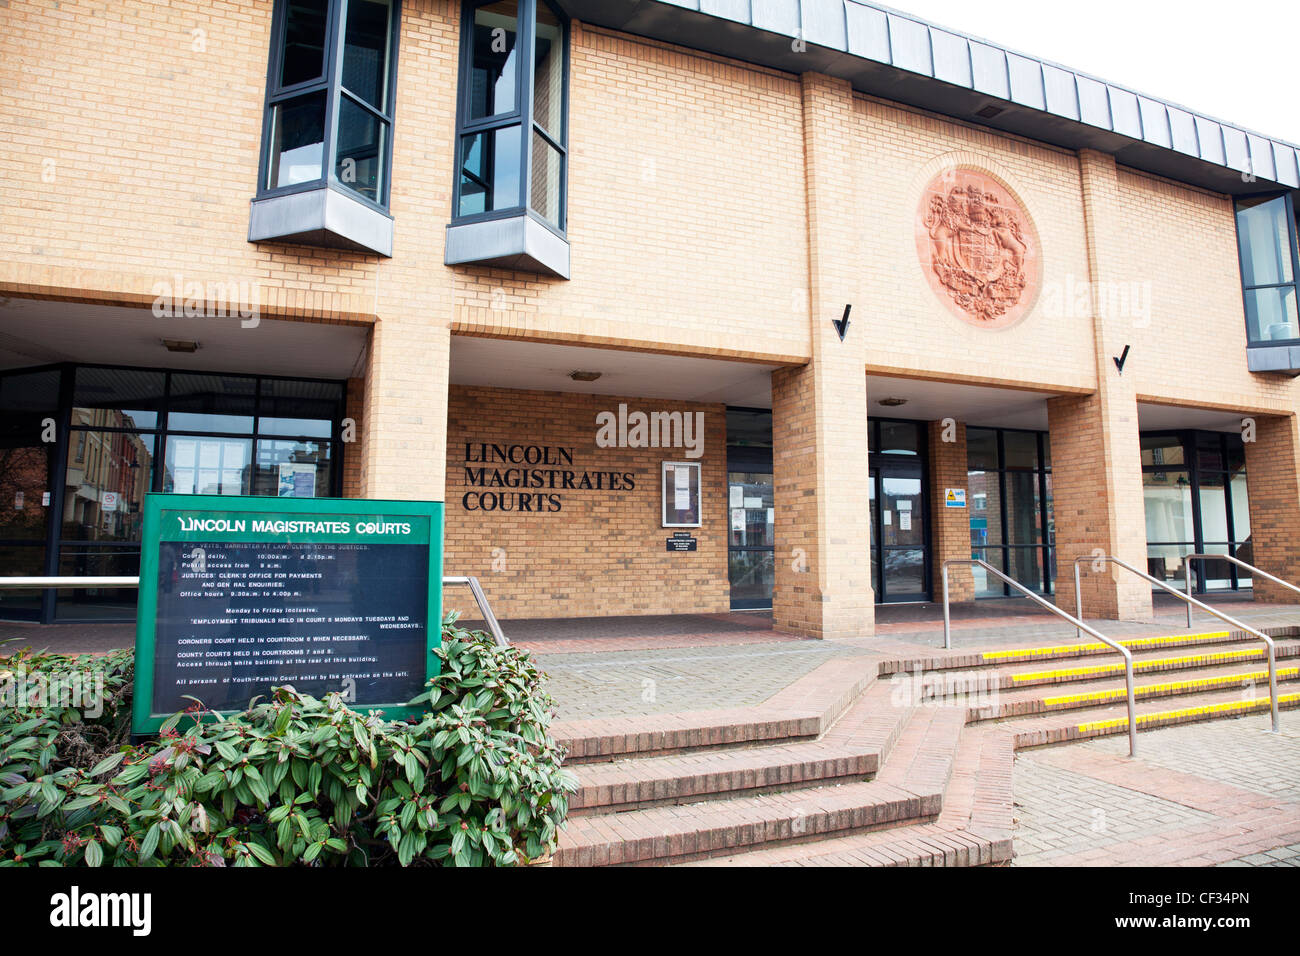 Entrance to Lincoln City Magistrates Courts building front facade on High Street Stock Photo